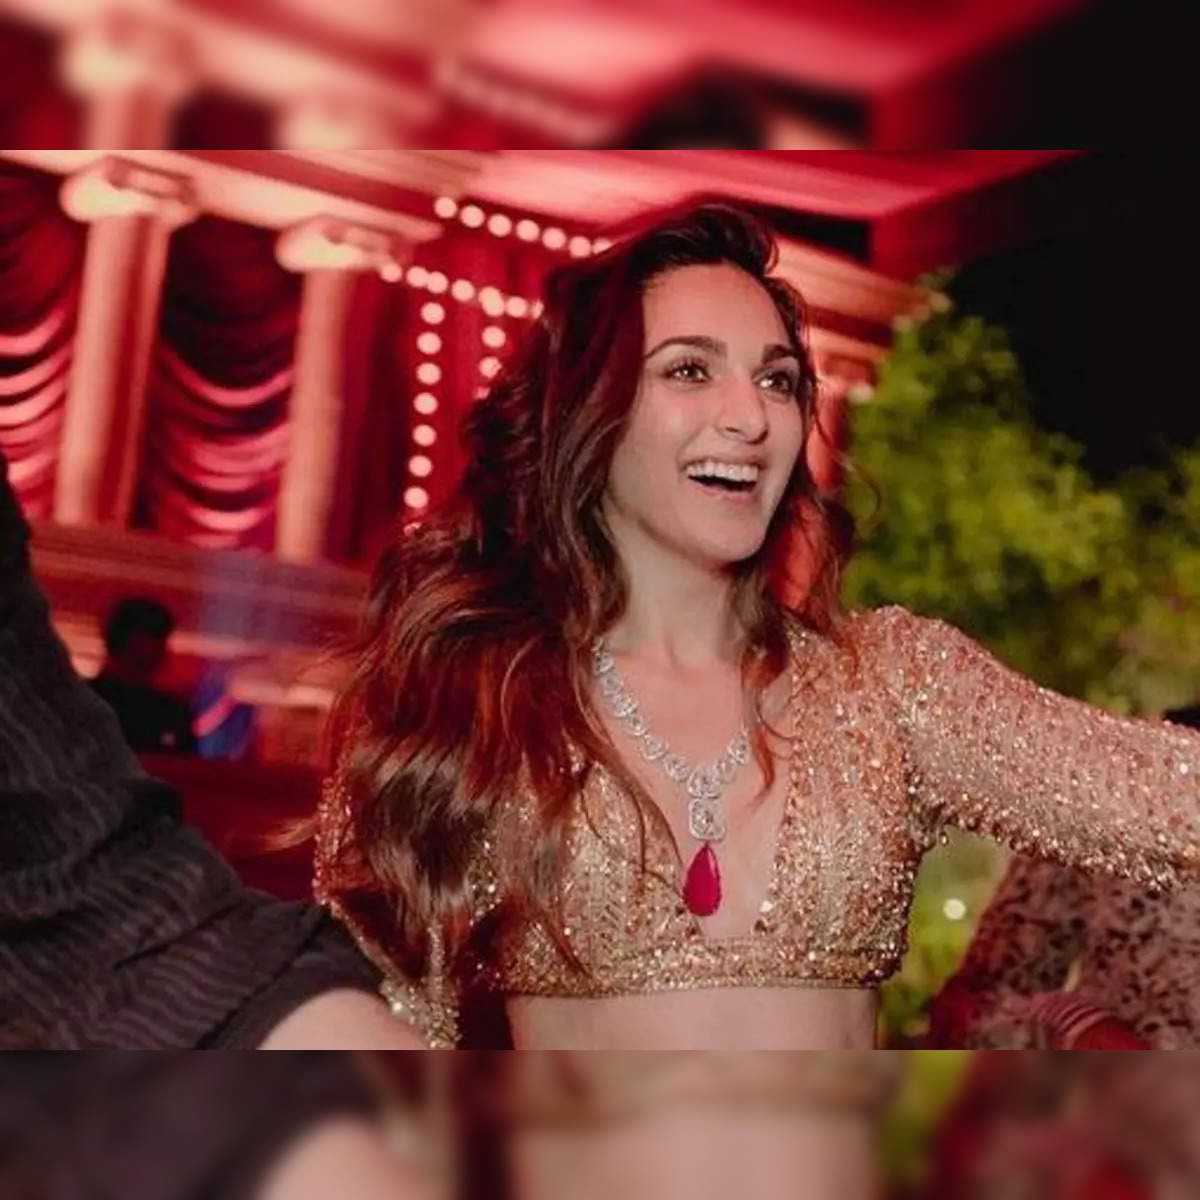 Kiara Advani sangeet lehenga: Did you know that Kiara Advani's sangeet  lehenga, with 98K Swarovski crystals, took 4,000 hours to be completed? -  The Economic Times